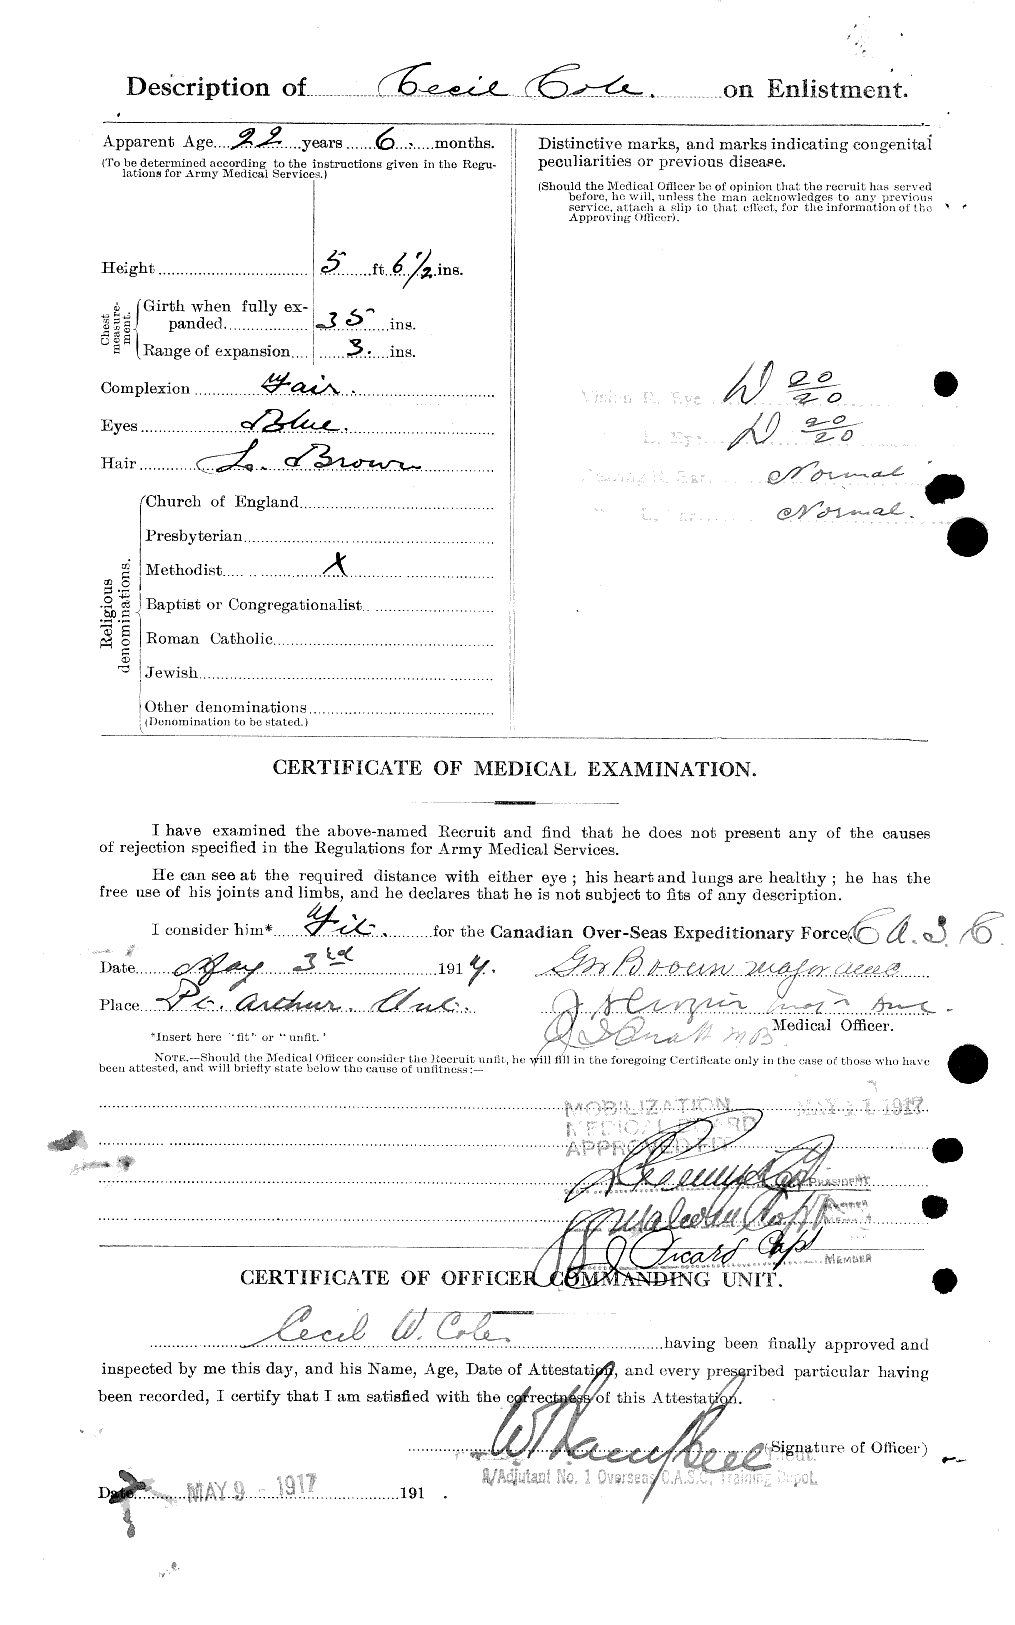 Personnel Records of the First World War - CEF 027628b